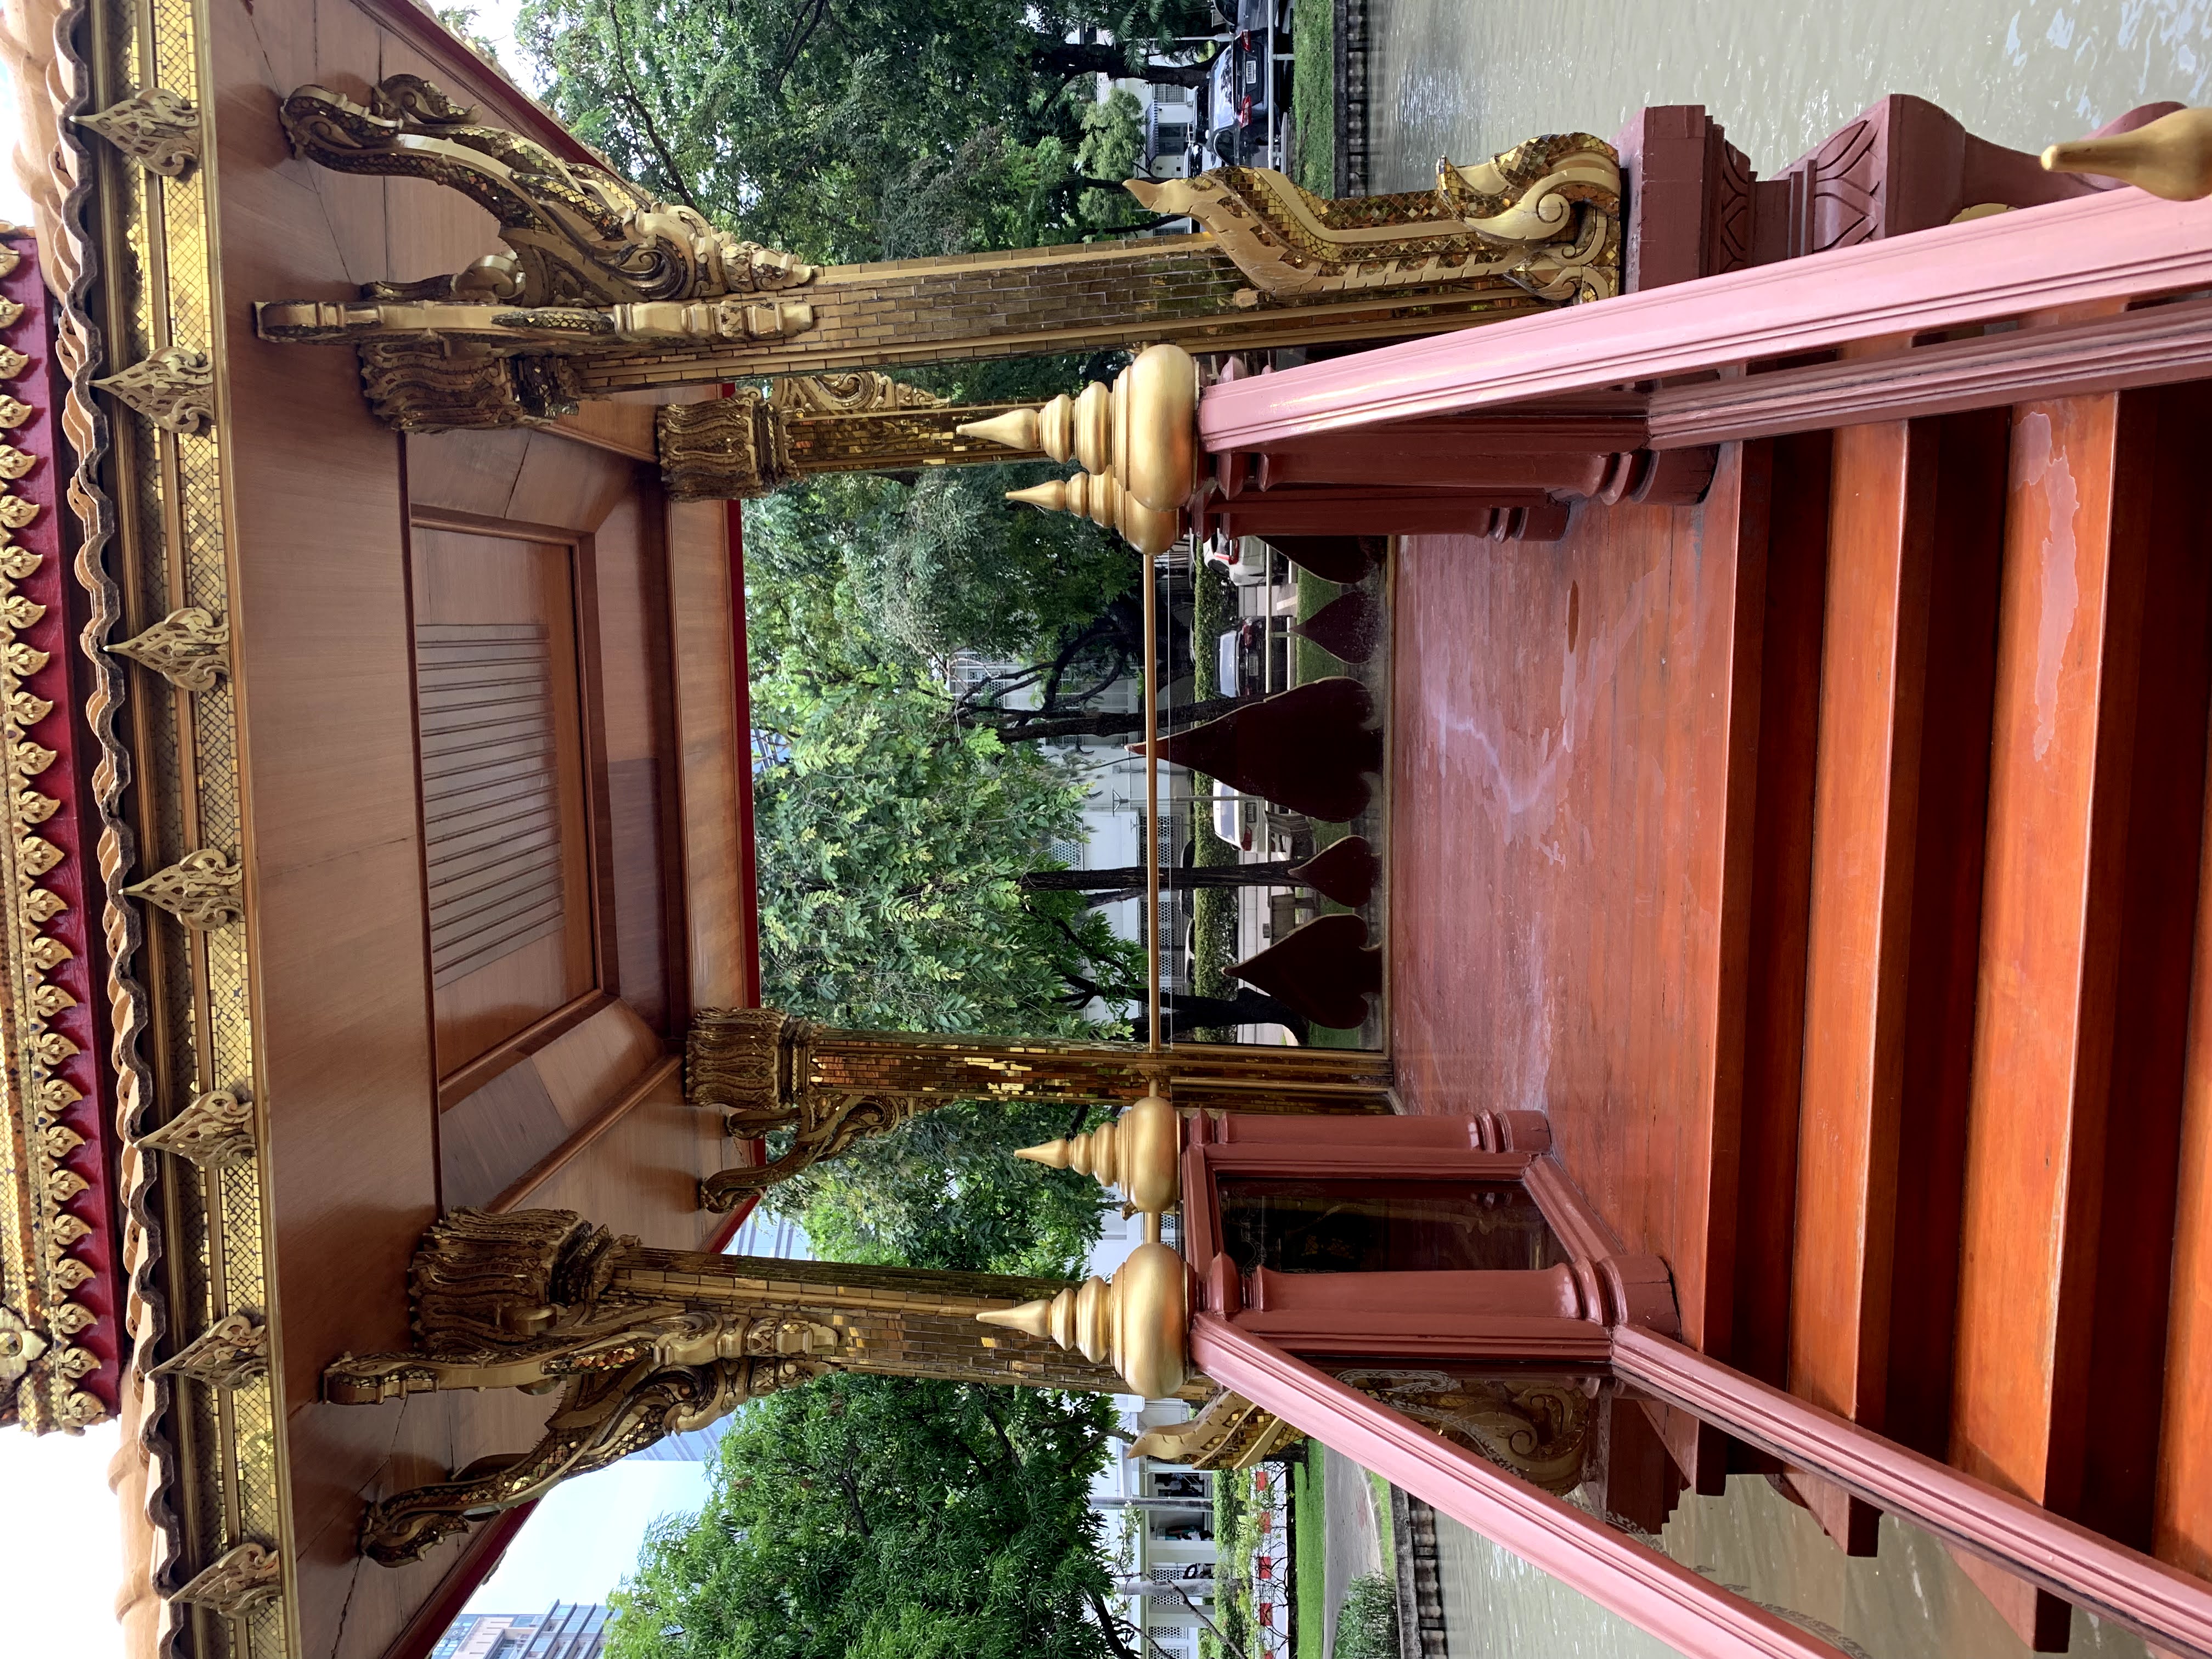 Color photograph, view up several low steps into the red and gold gazebo, noting the gilded supports or pillars and gilded cornice